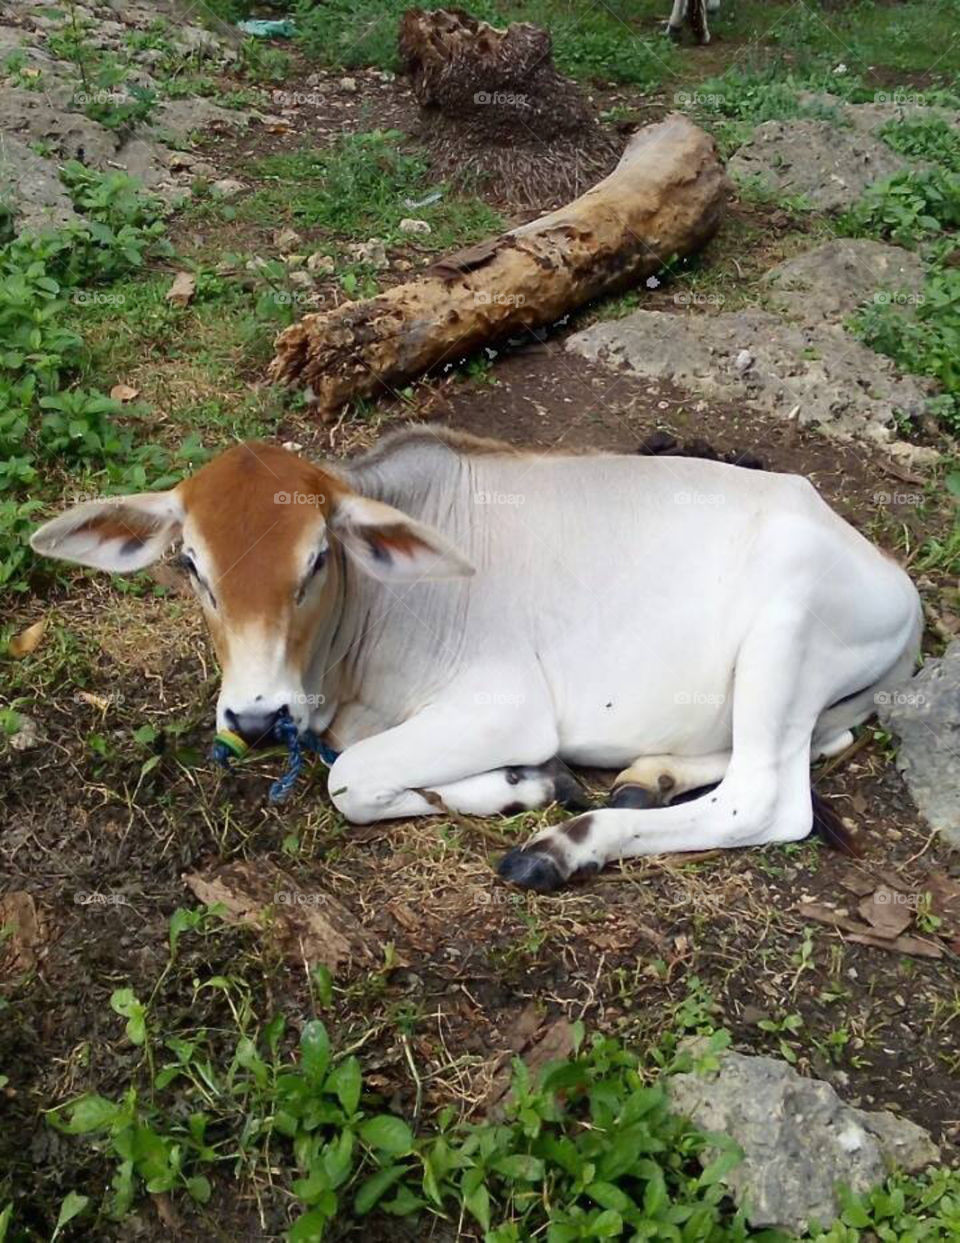 A "calf " moment. Time to rest under the shades of the trees. Peaceful time.